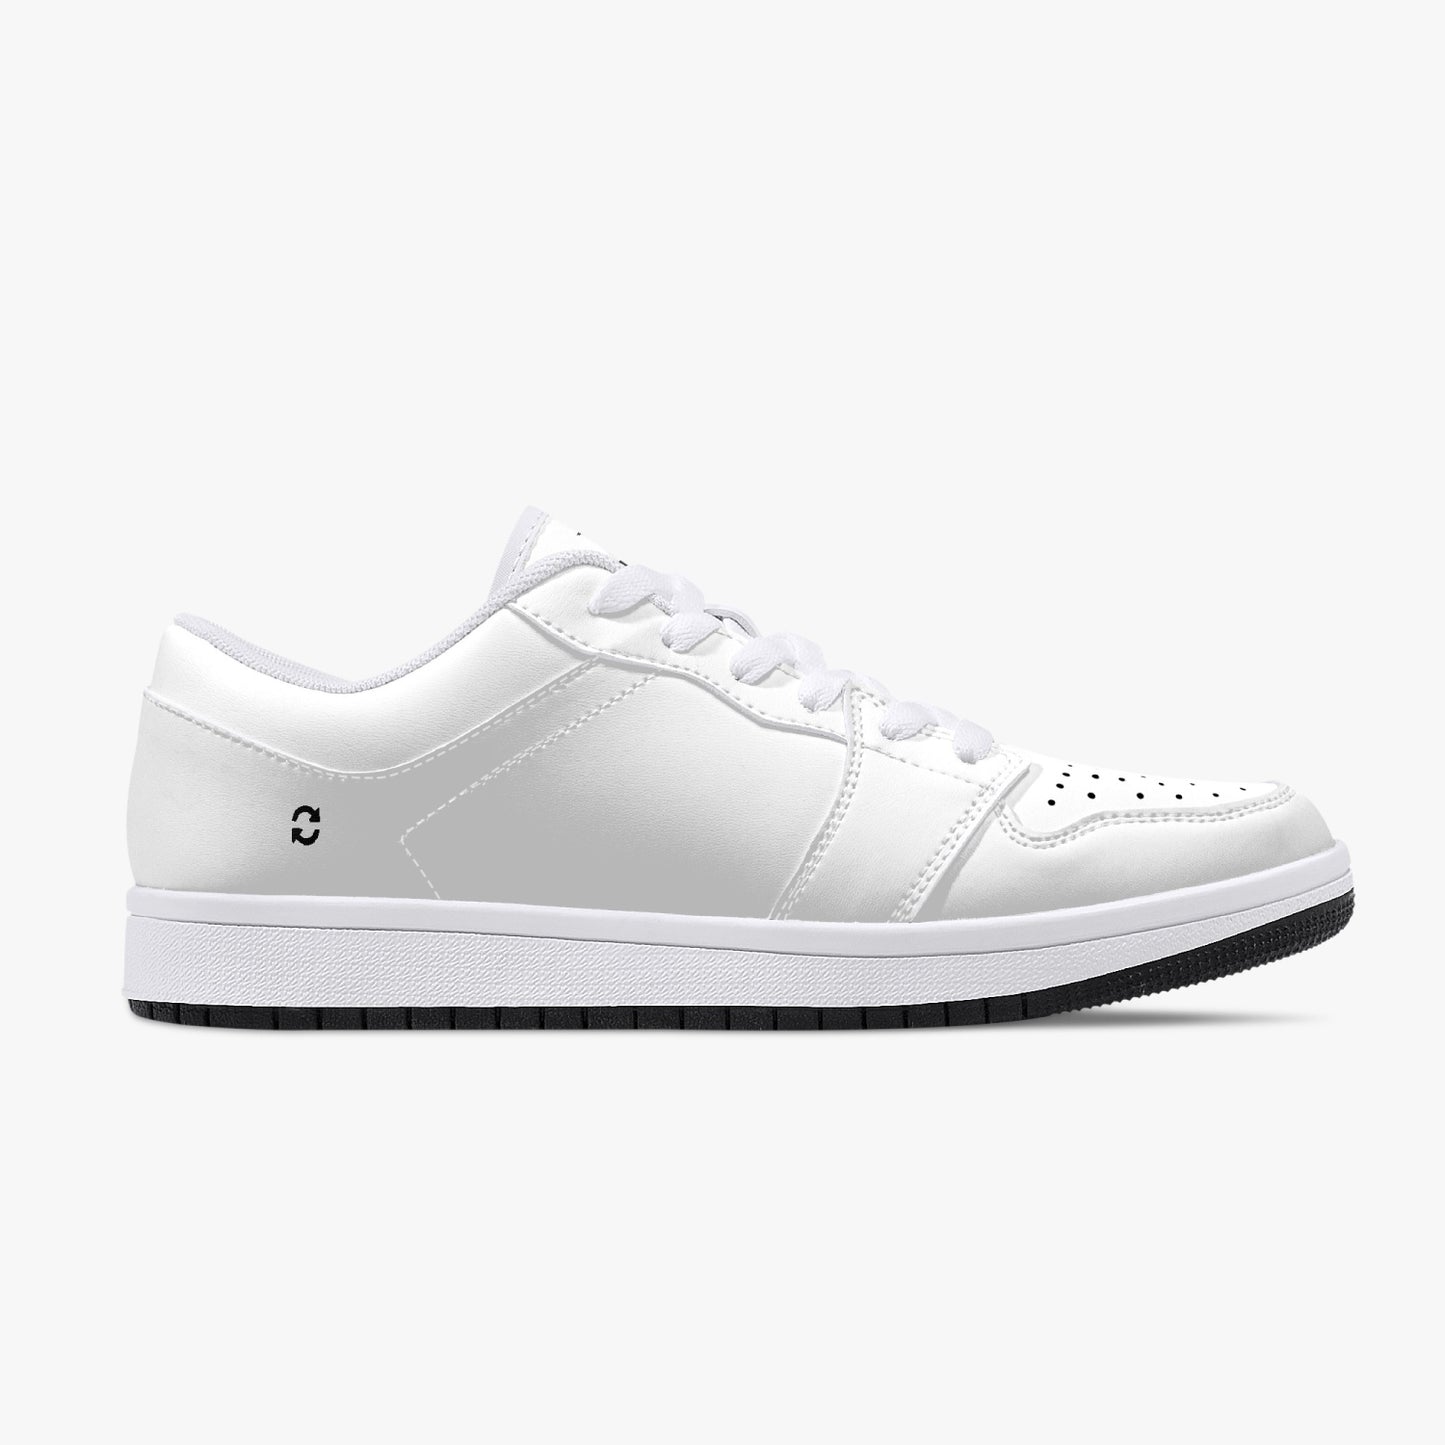 Unisex Top Leather Sneakers - White/Black